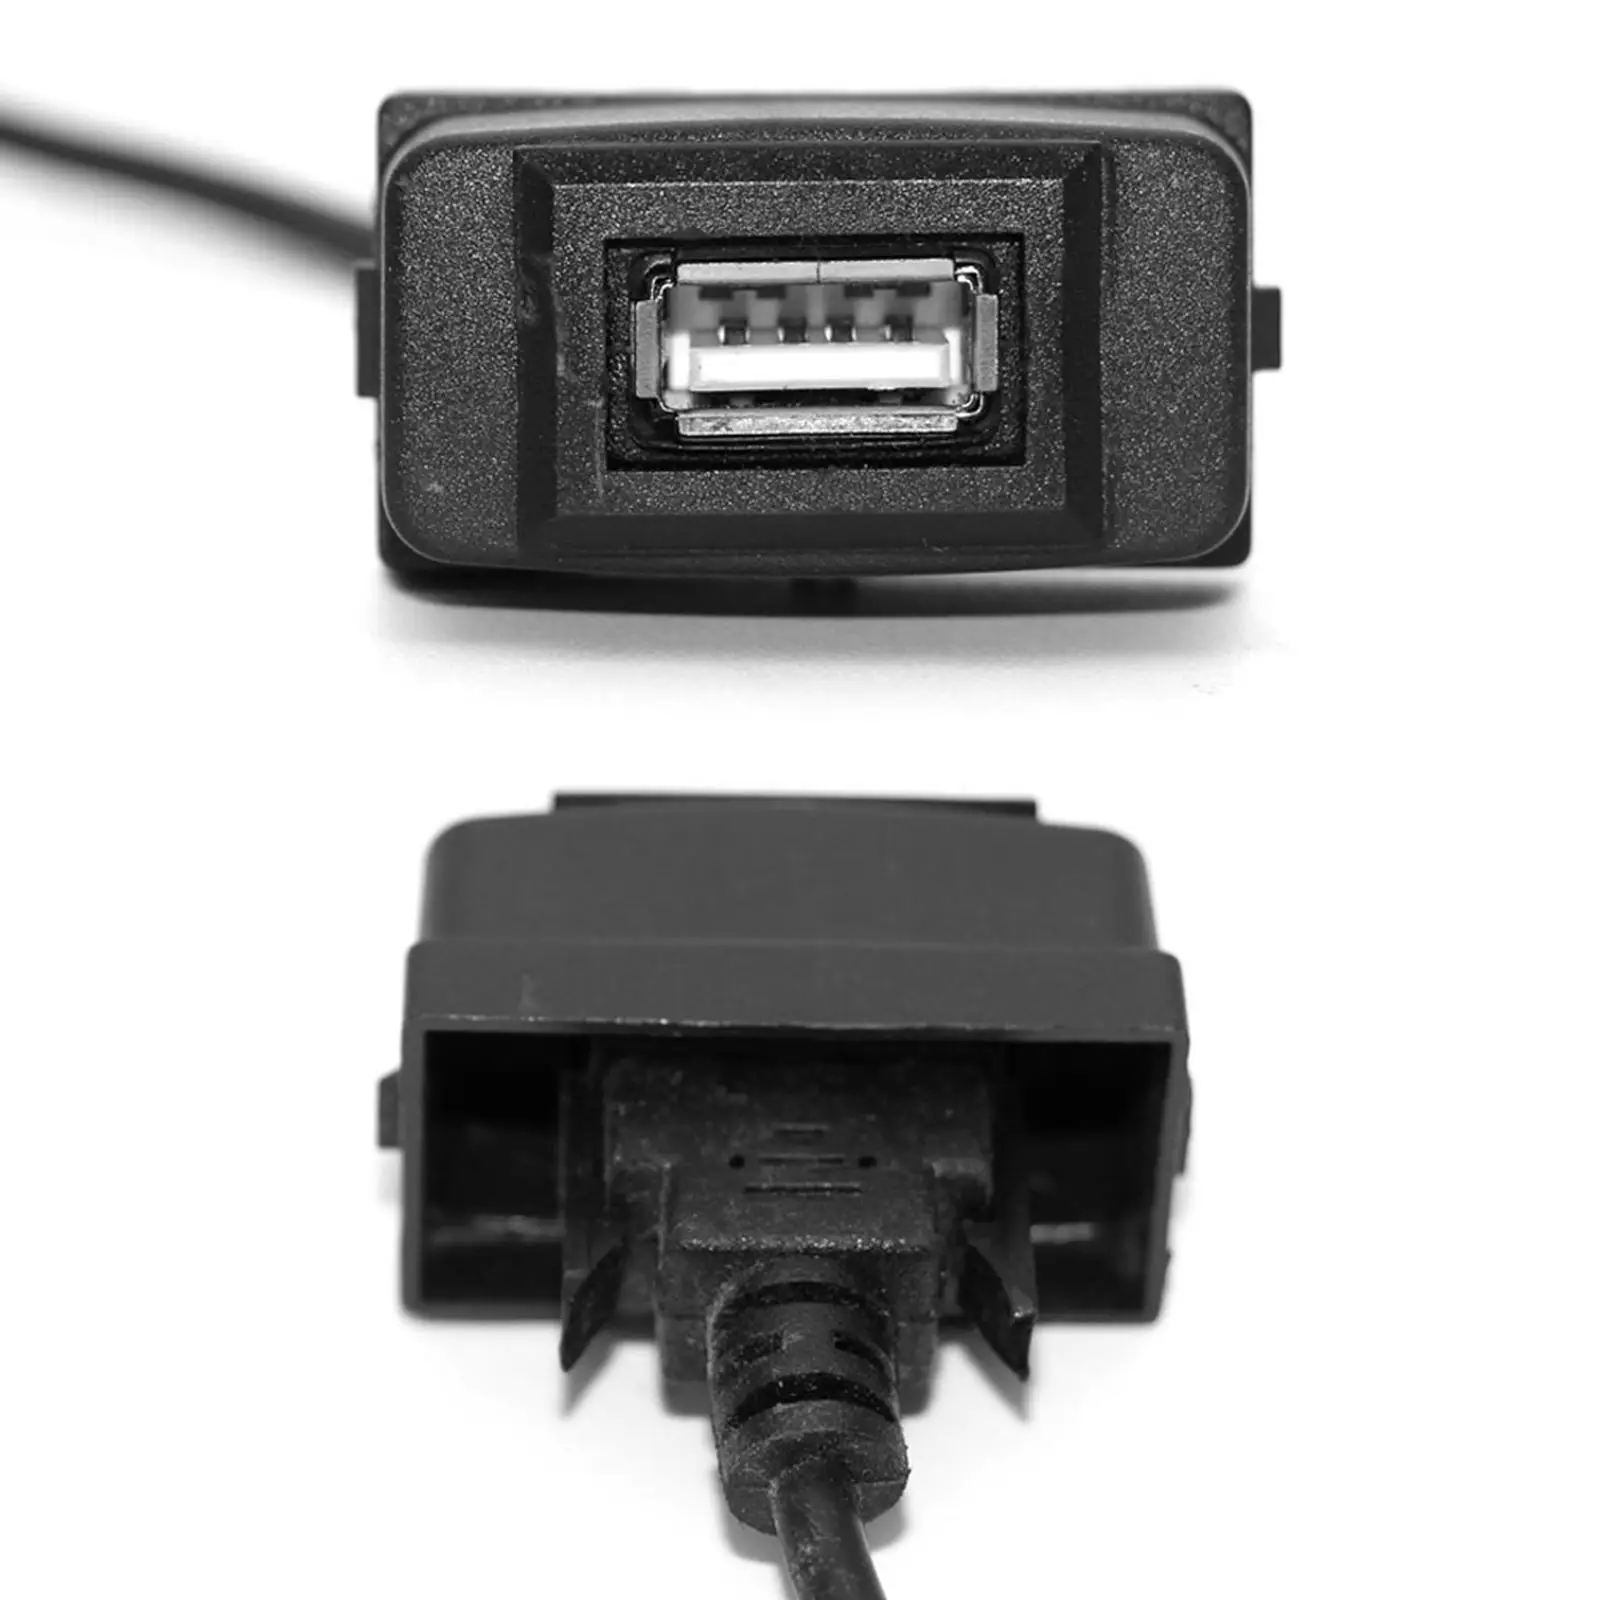 Car USB 2.0 Port Panel Socket Adapter Cable USB 2.0 Port Panel Mount Male to Female for Asx Line Extension Accessory